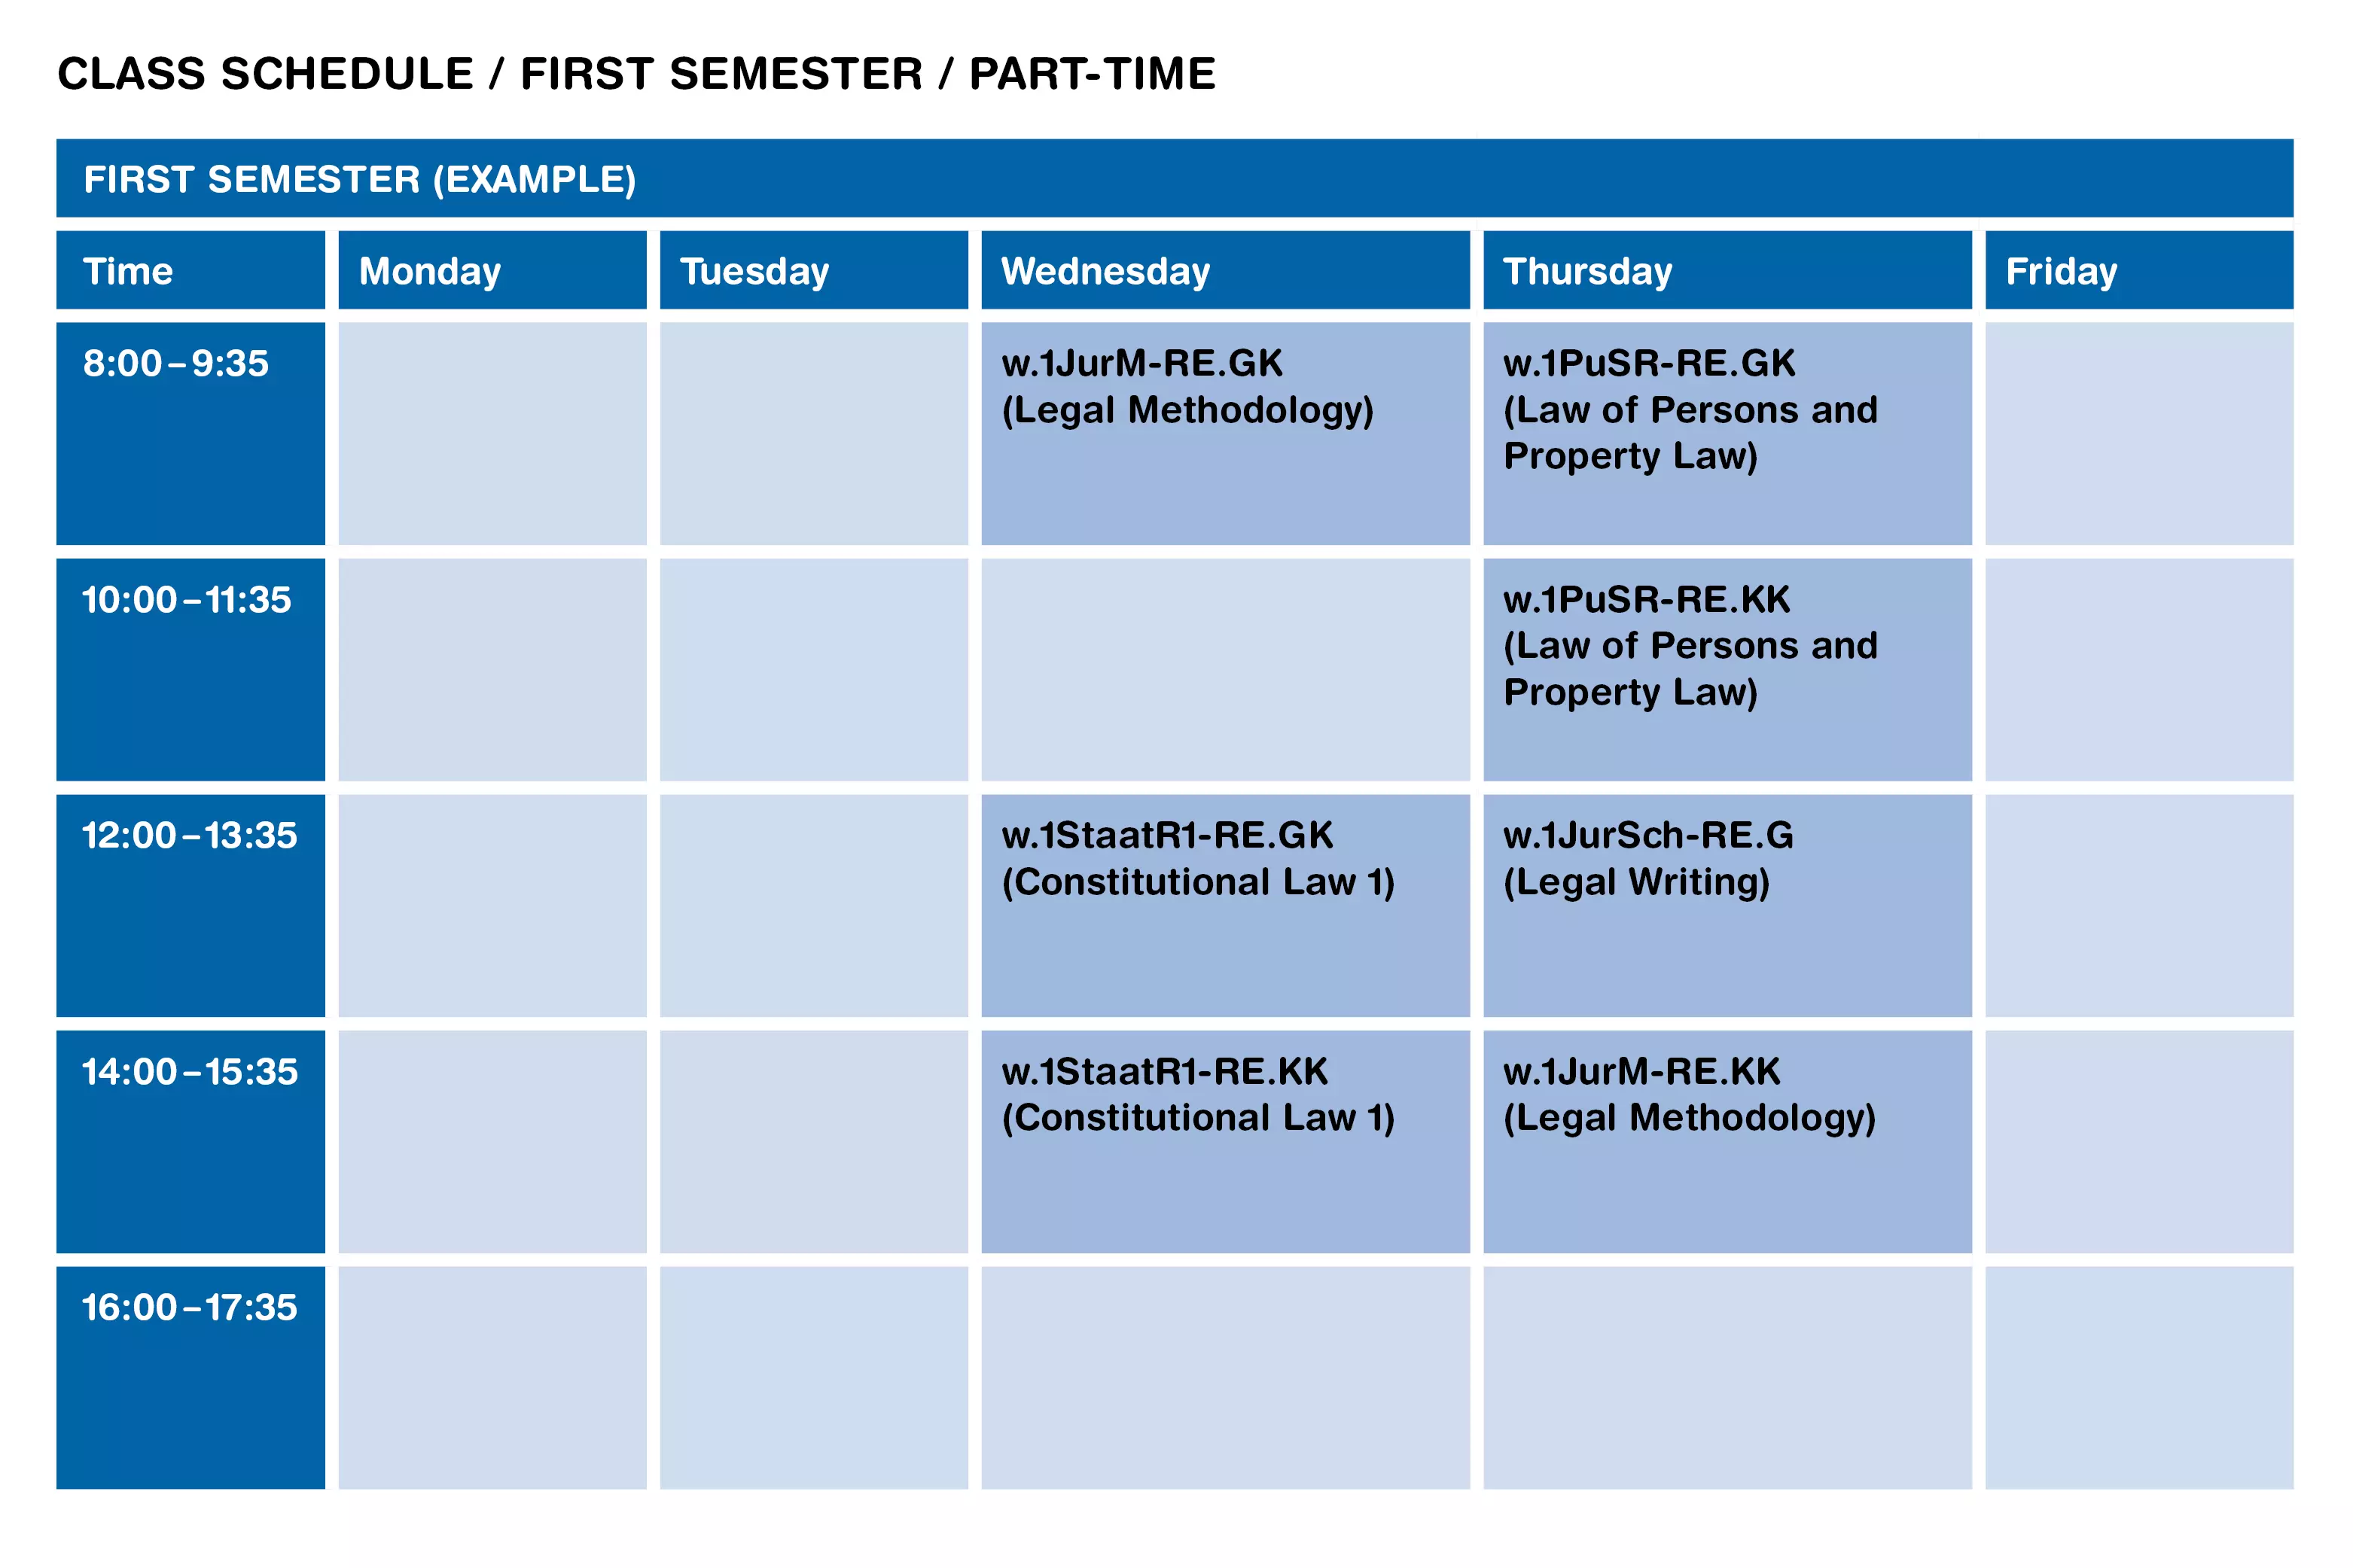 Example Schedule Part-time Applied Law